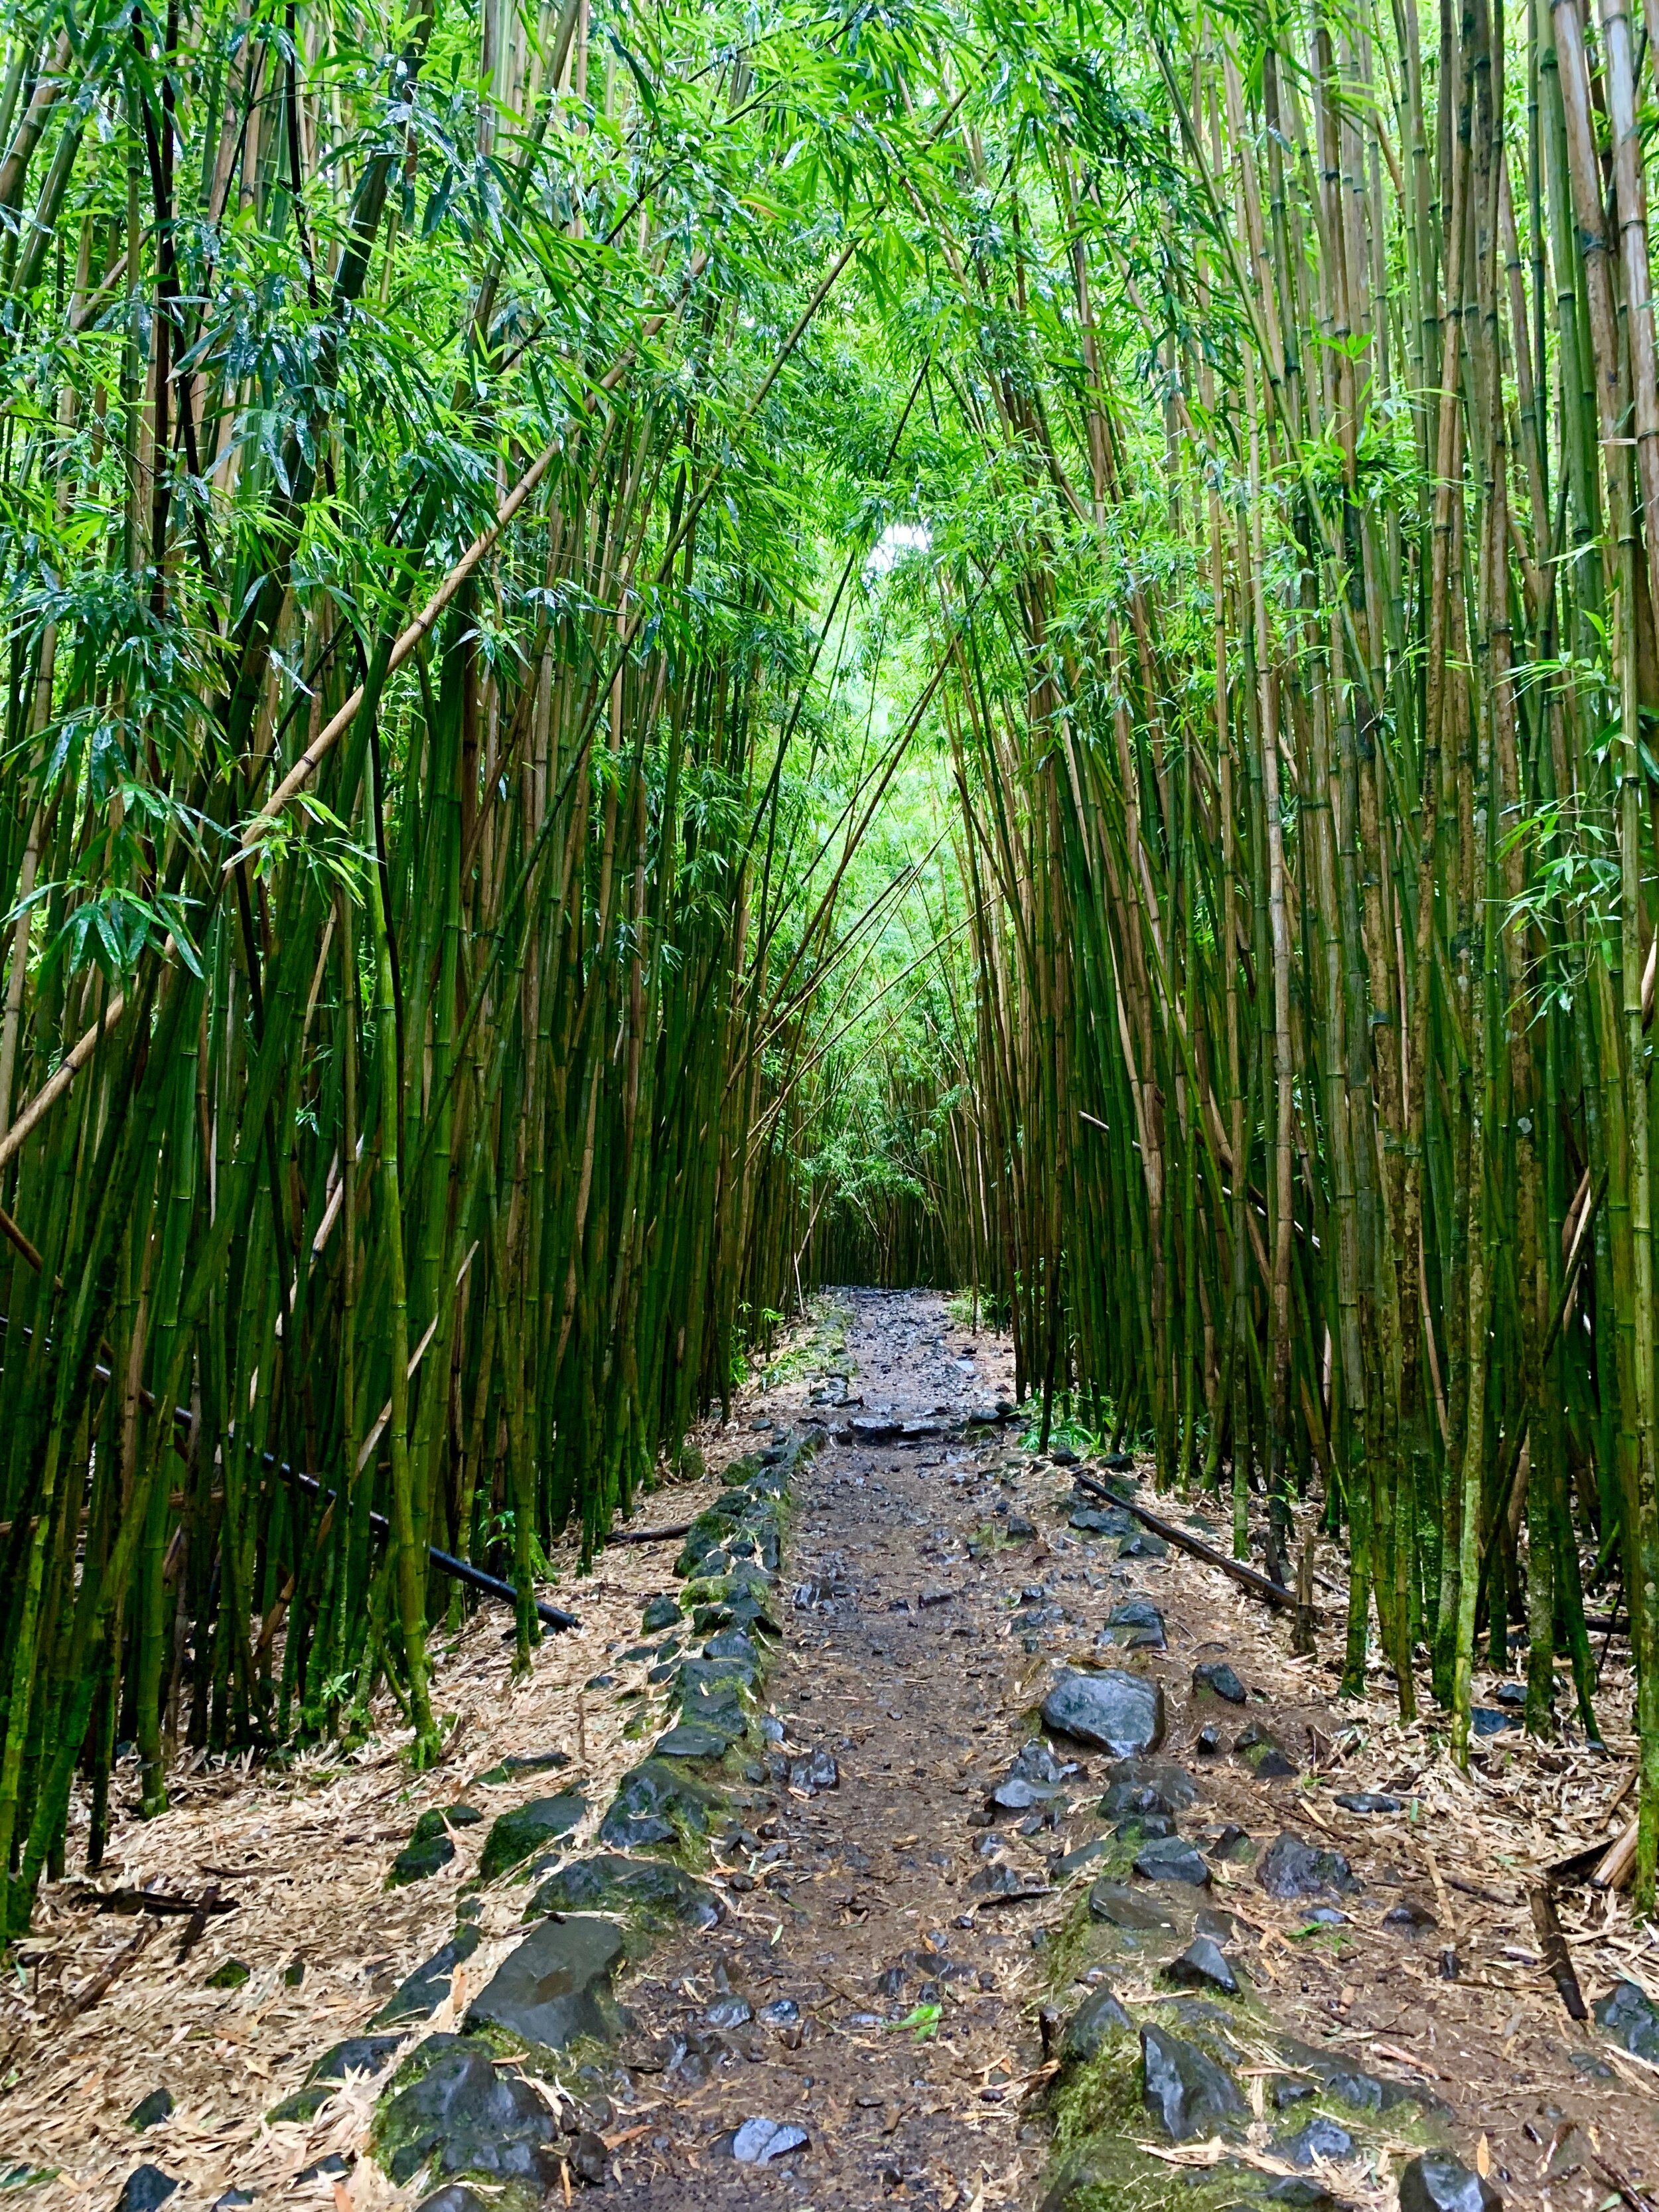 5. Seven Sacred Pool &amp; Bamboo Forest